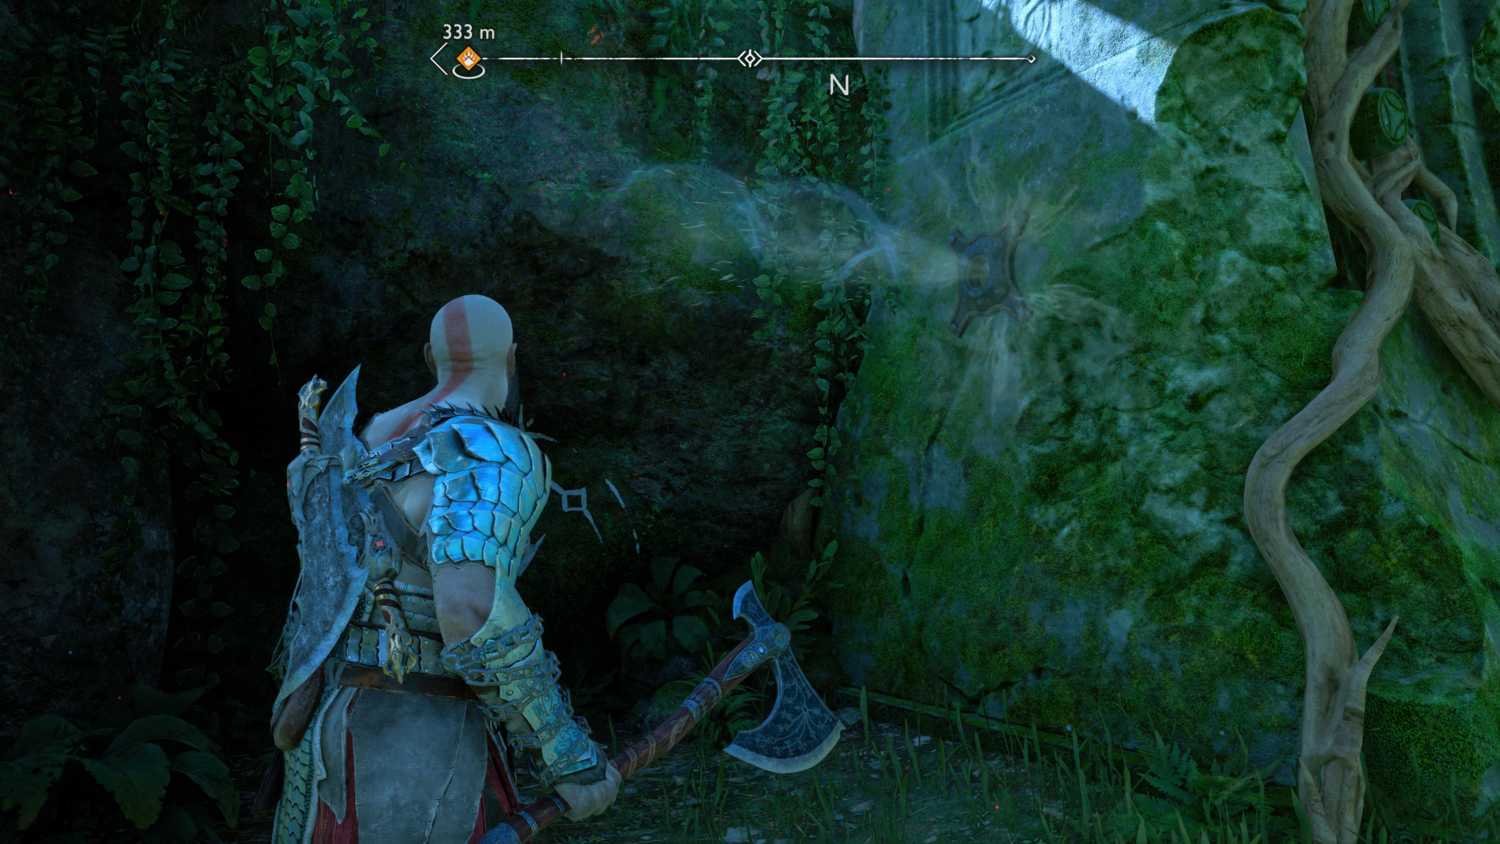 steam vents in god of war